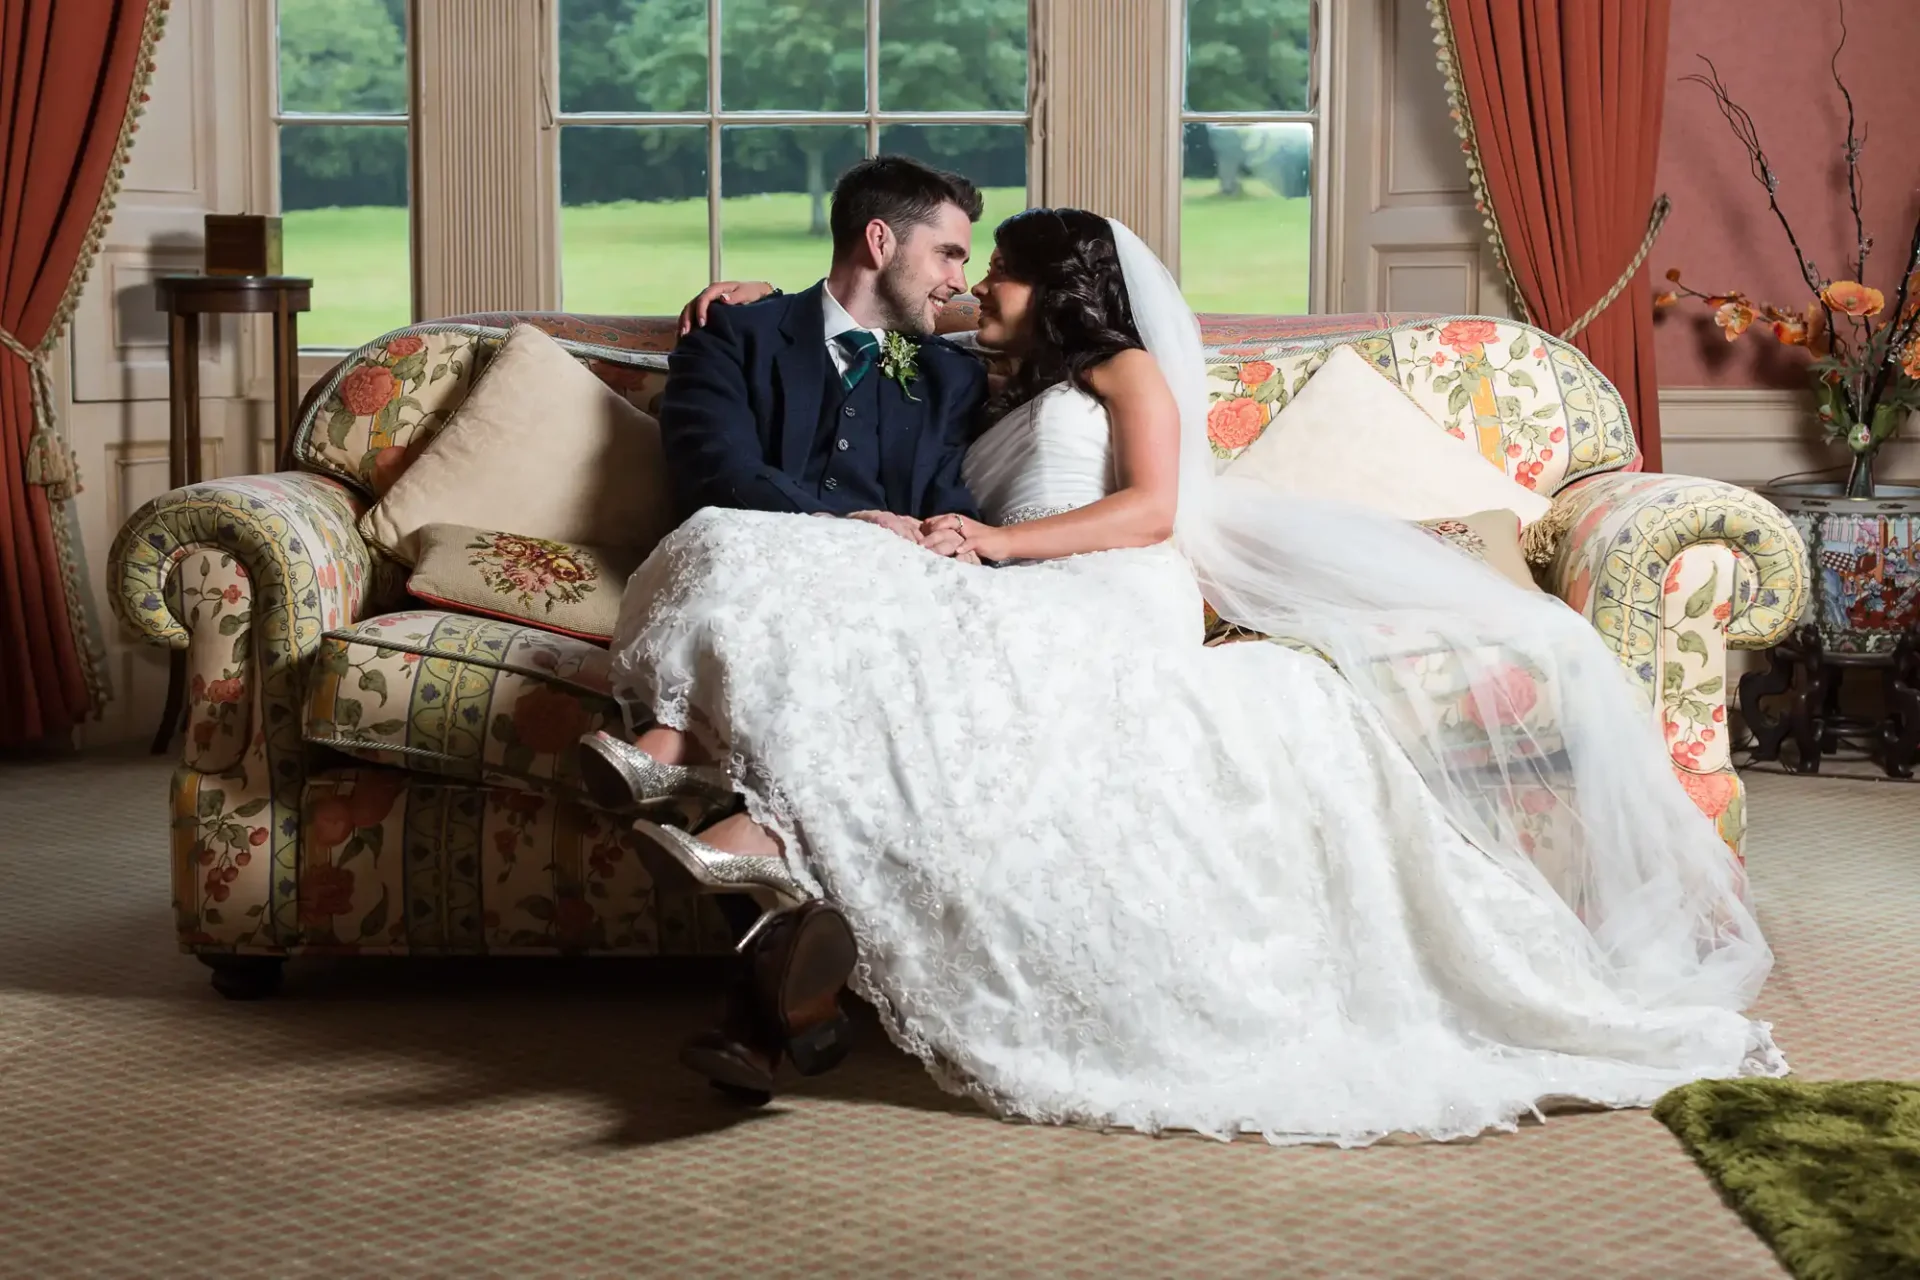 A newlywed couple sitting on a couch, smiling at each other in an elegant room, with the bride in a white dress and the groom in a navy suit.